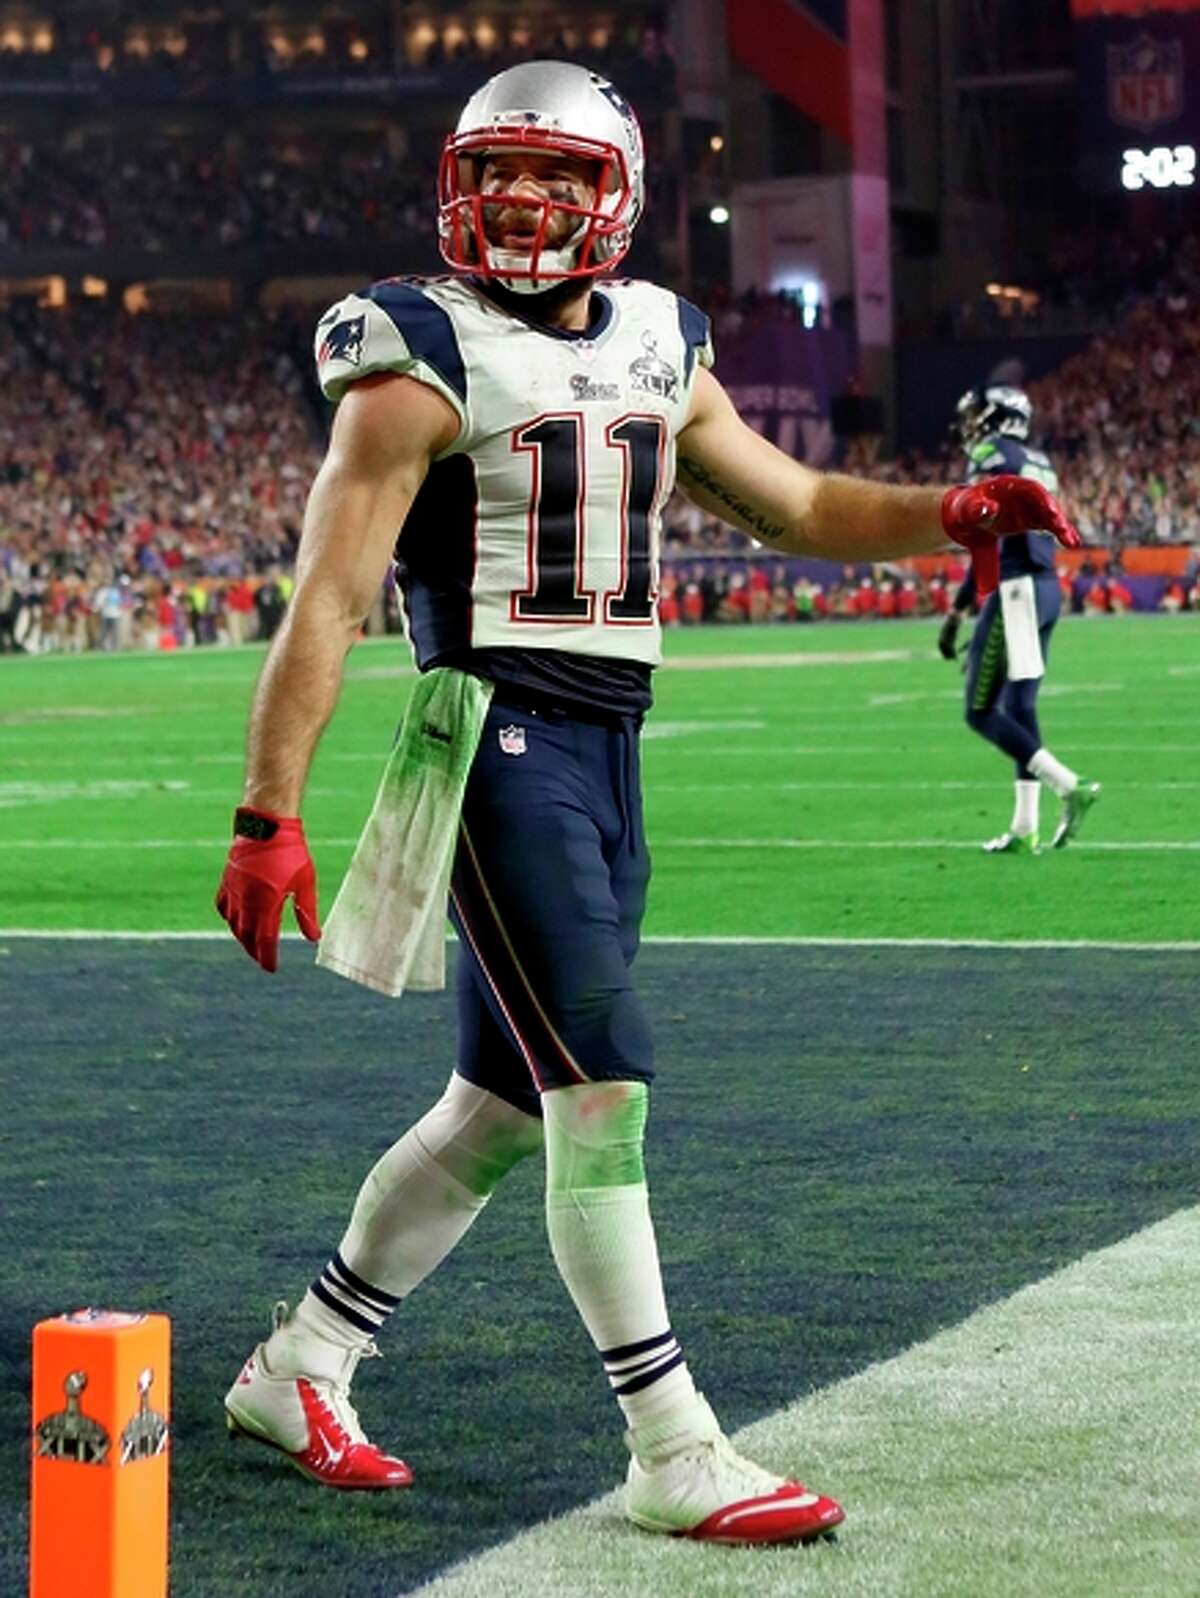 Julian Edelman celebrates after his TD catch with 2:02 left in the Super Bowl.